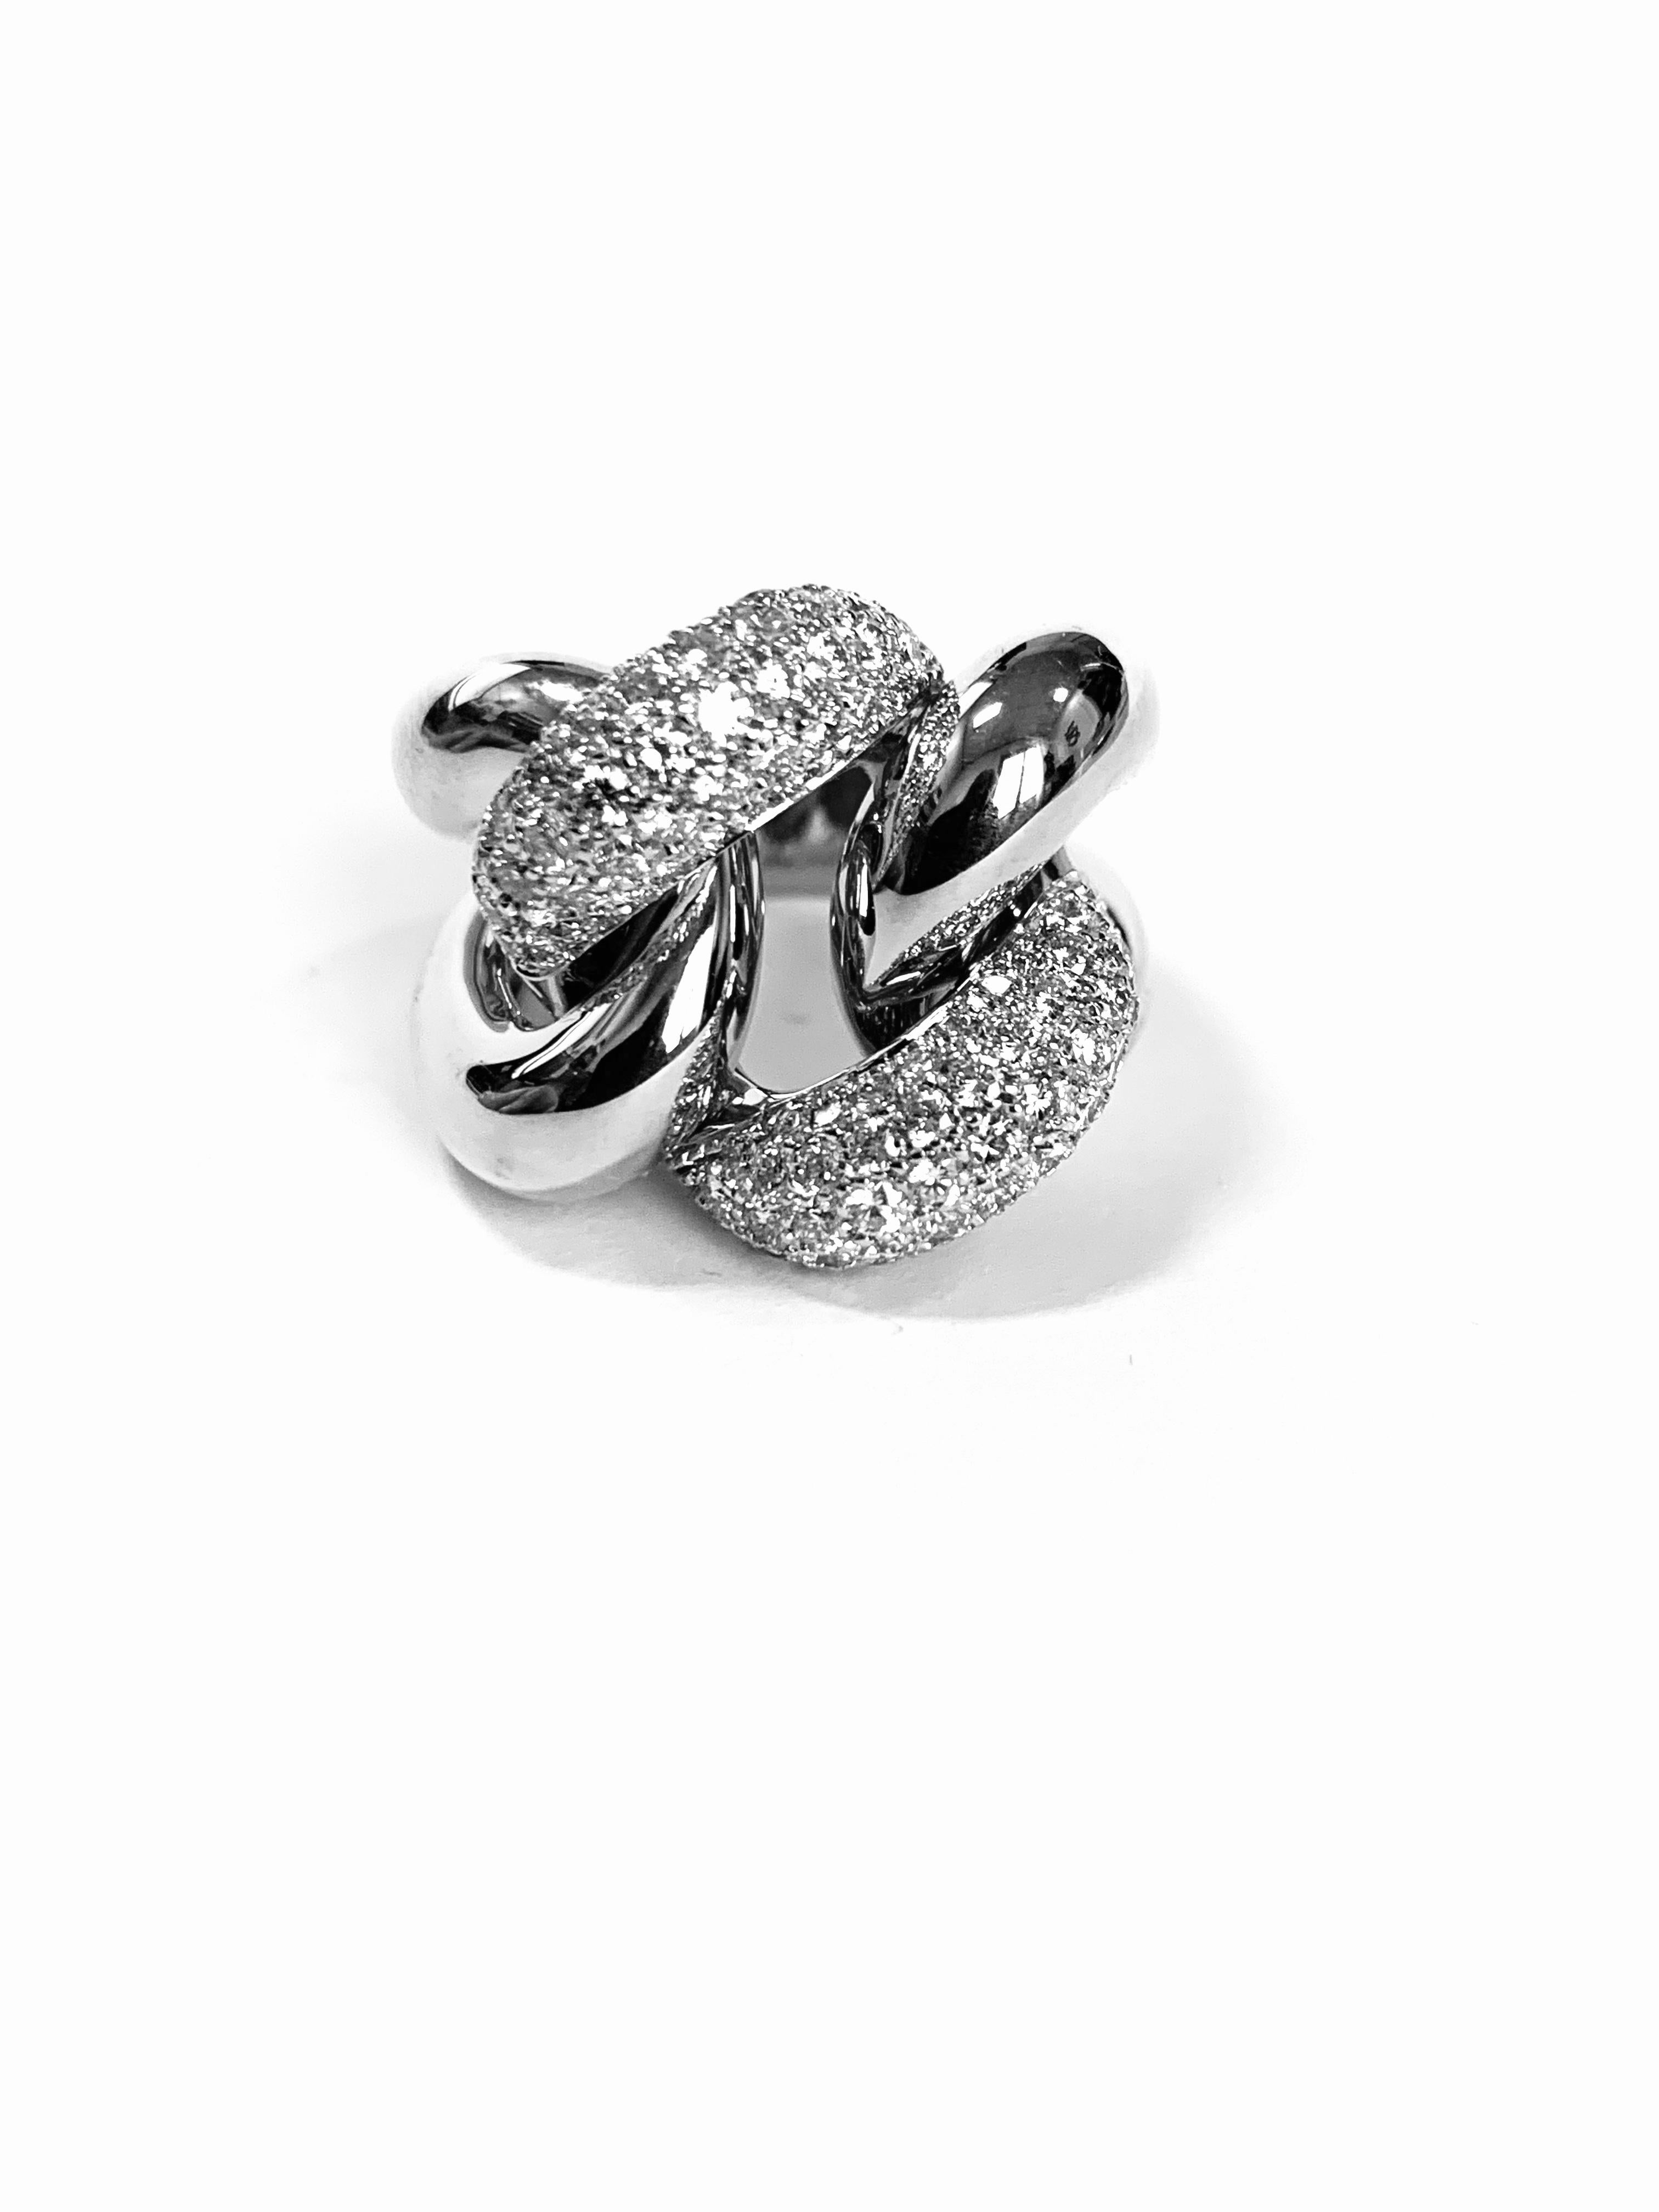 Classic groumette ring in 18 kt white gold and white diamonds

This is the iconic collection of Micheletto

the total weight of the gold is  gr 17,20
the total weight of the diamonds is ct  - color GH clarity VVS1
STAMP: 10 MI ITALY 750
US SIZE